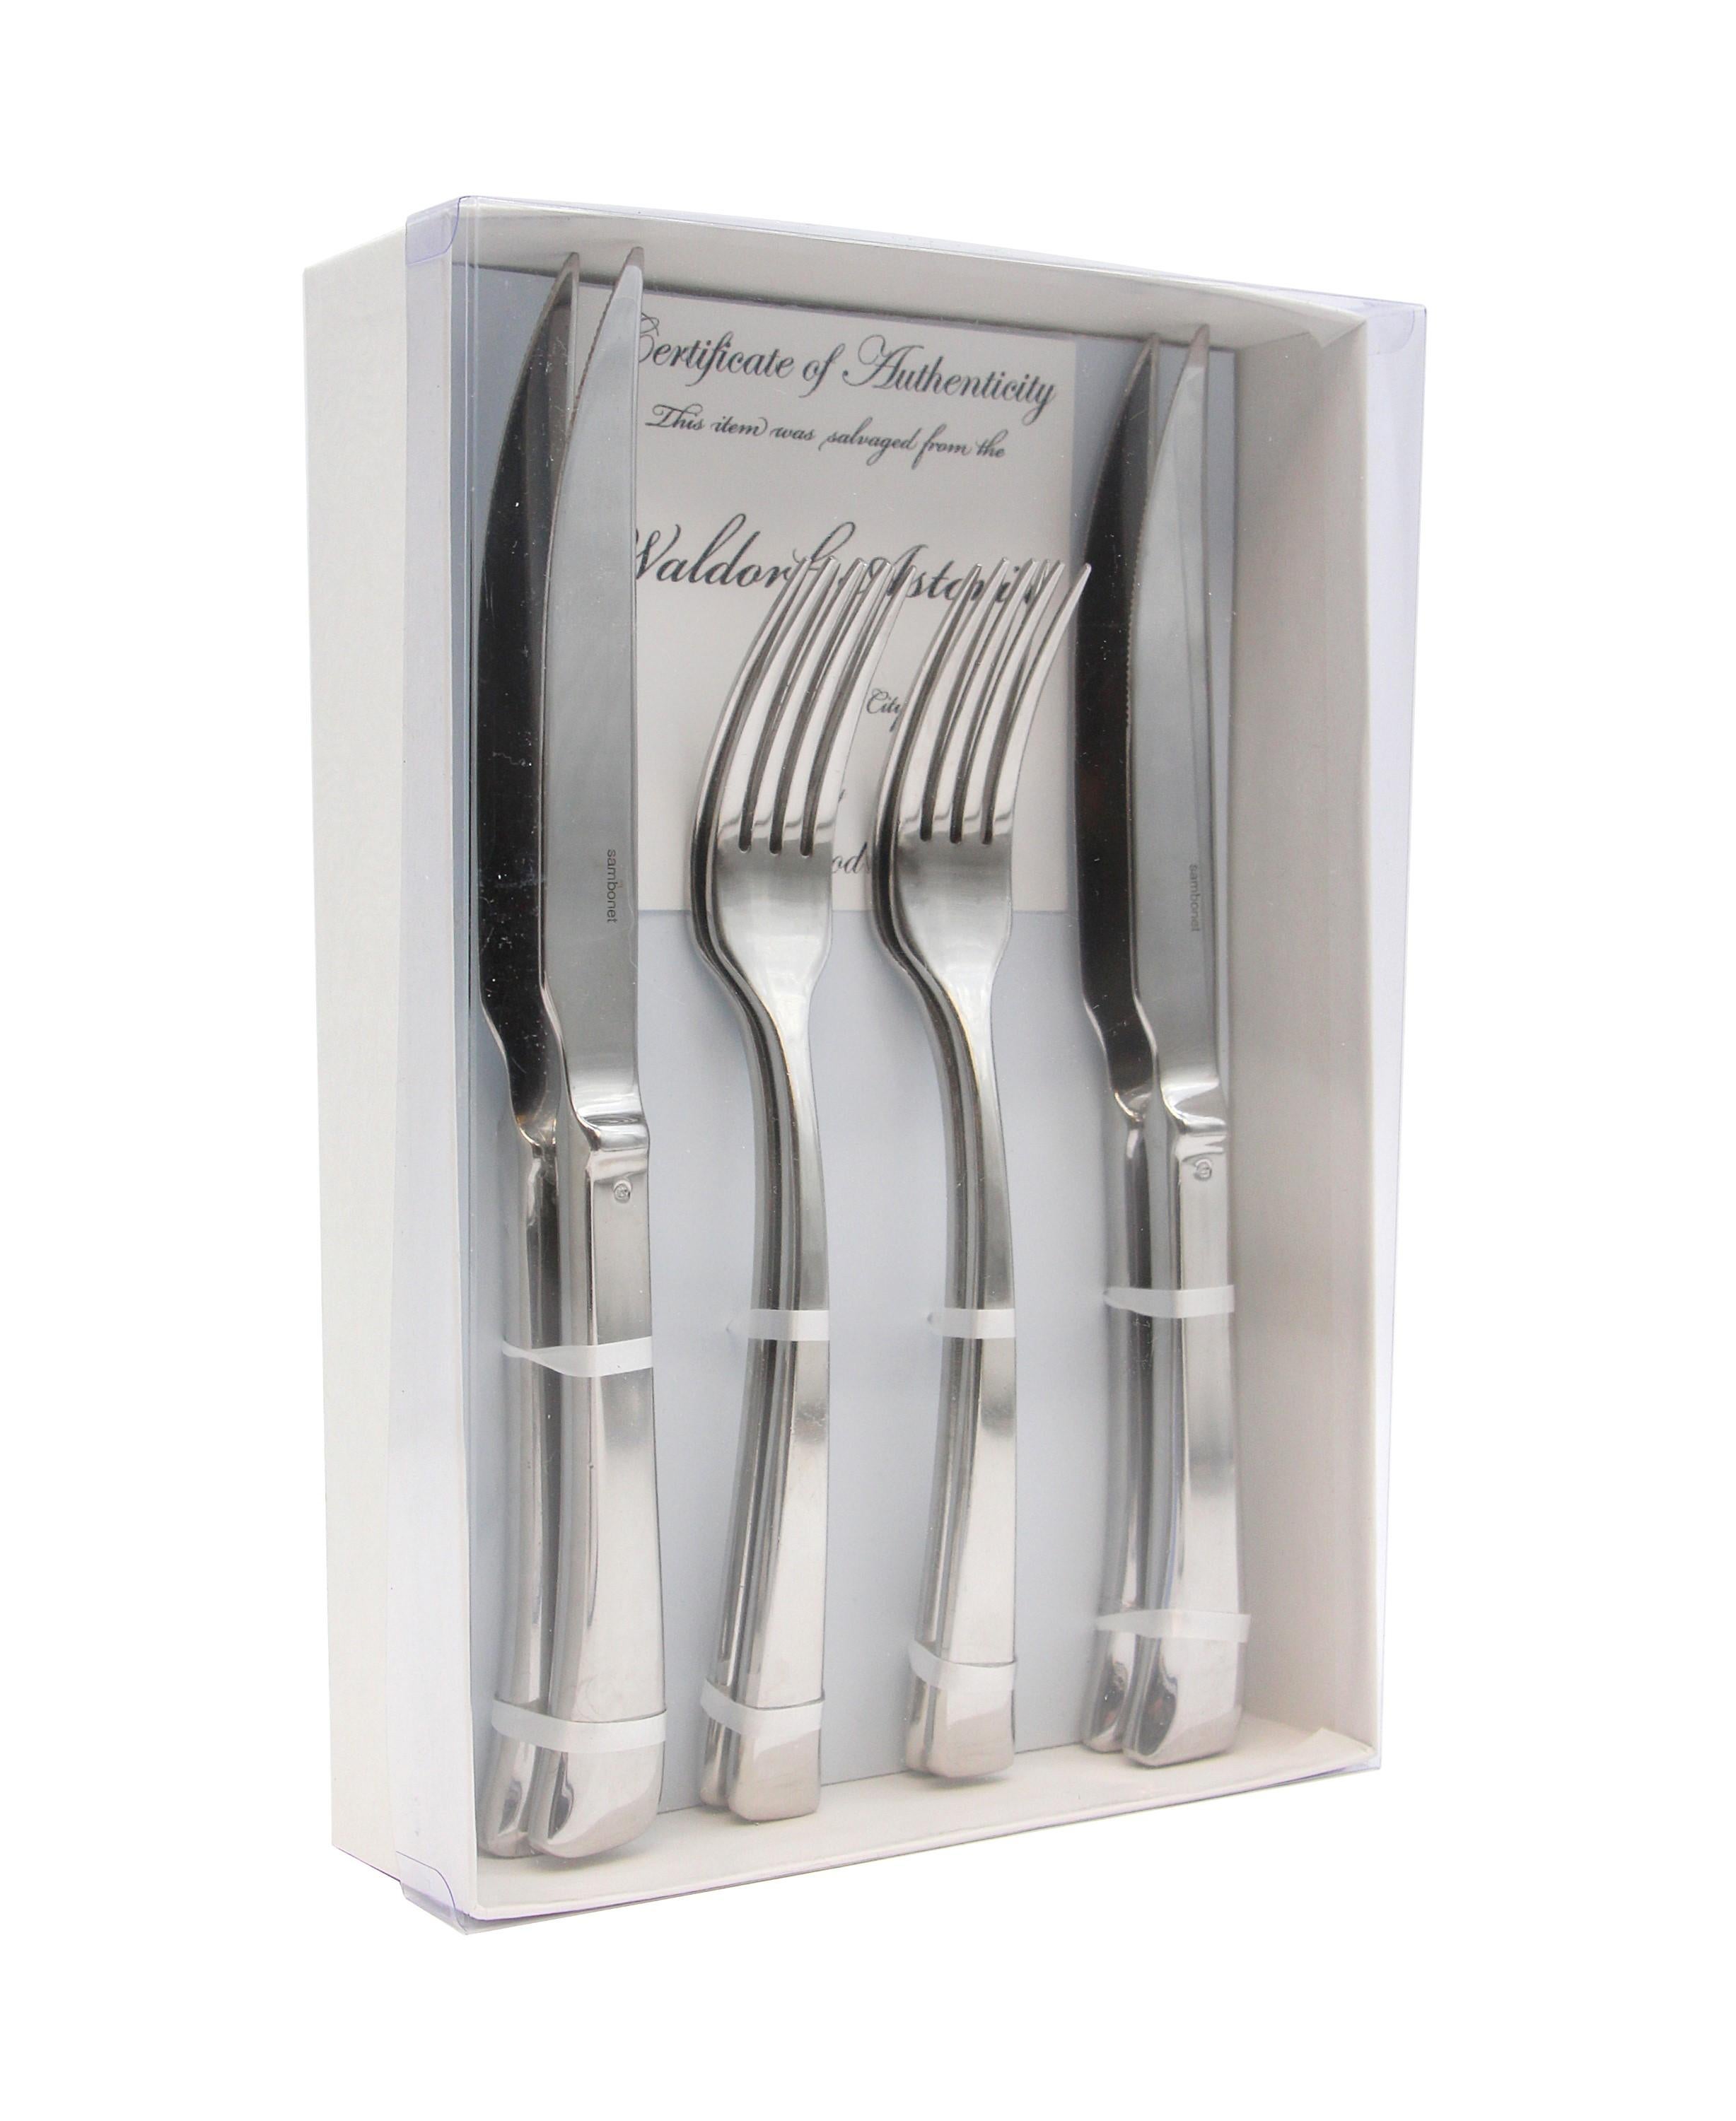 2010- high quality stainless steel new steak knife and dinner fork 8 piece set. Set includes 4 steak knives and 4 forks. Made by Sambonet in their Imagine style in Italy. These never used pieces were replacement stock from one of the NYC Waldorf